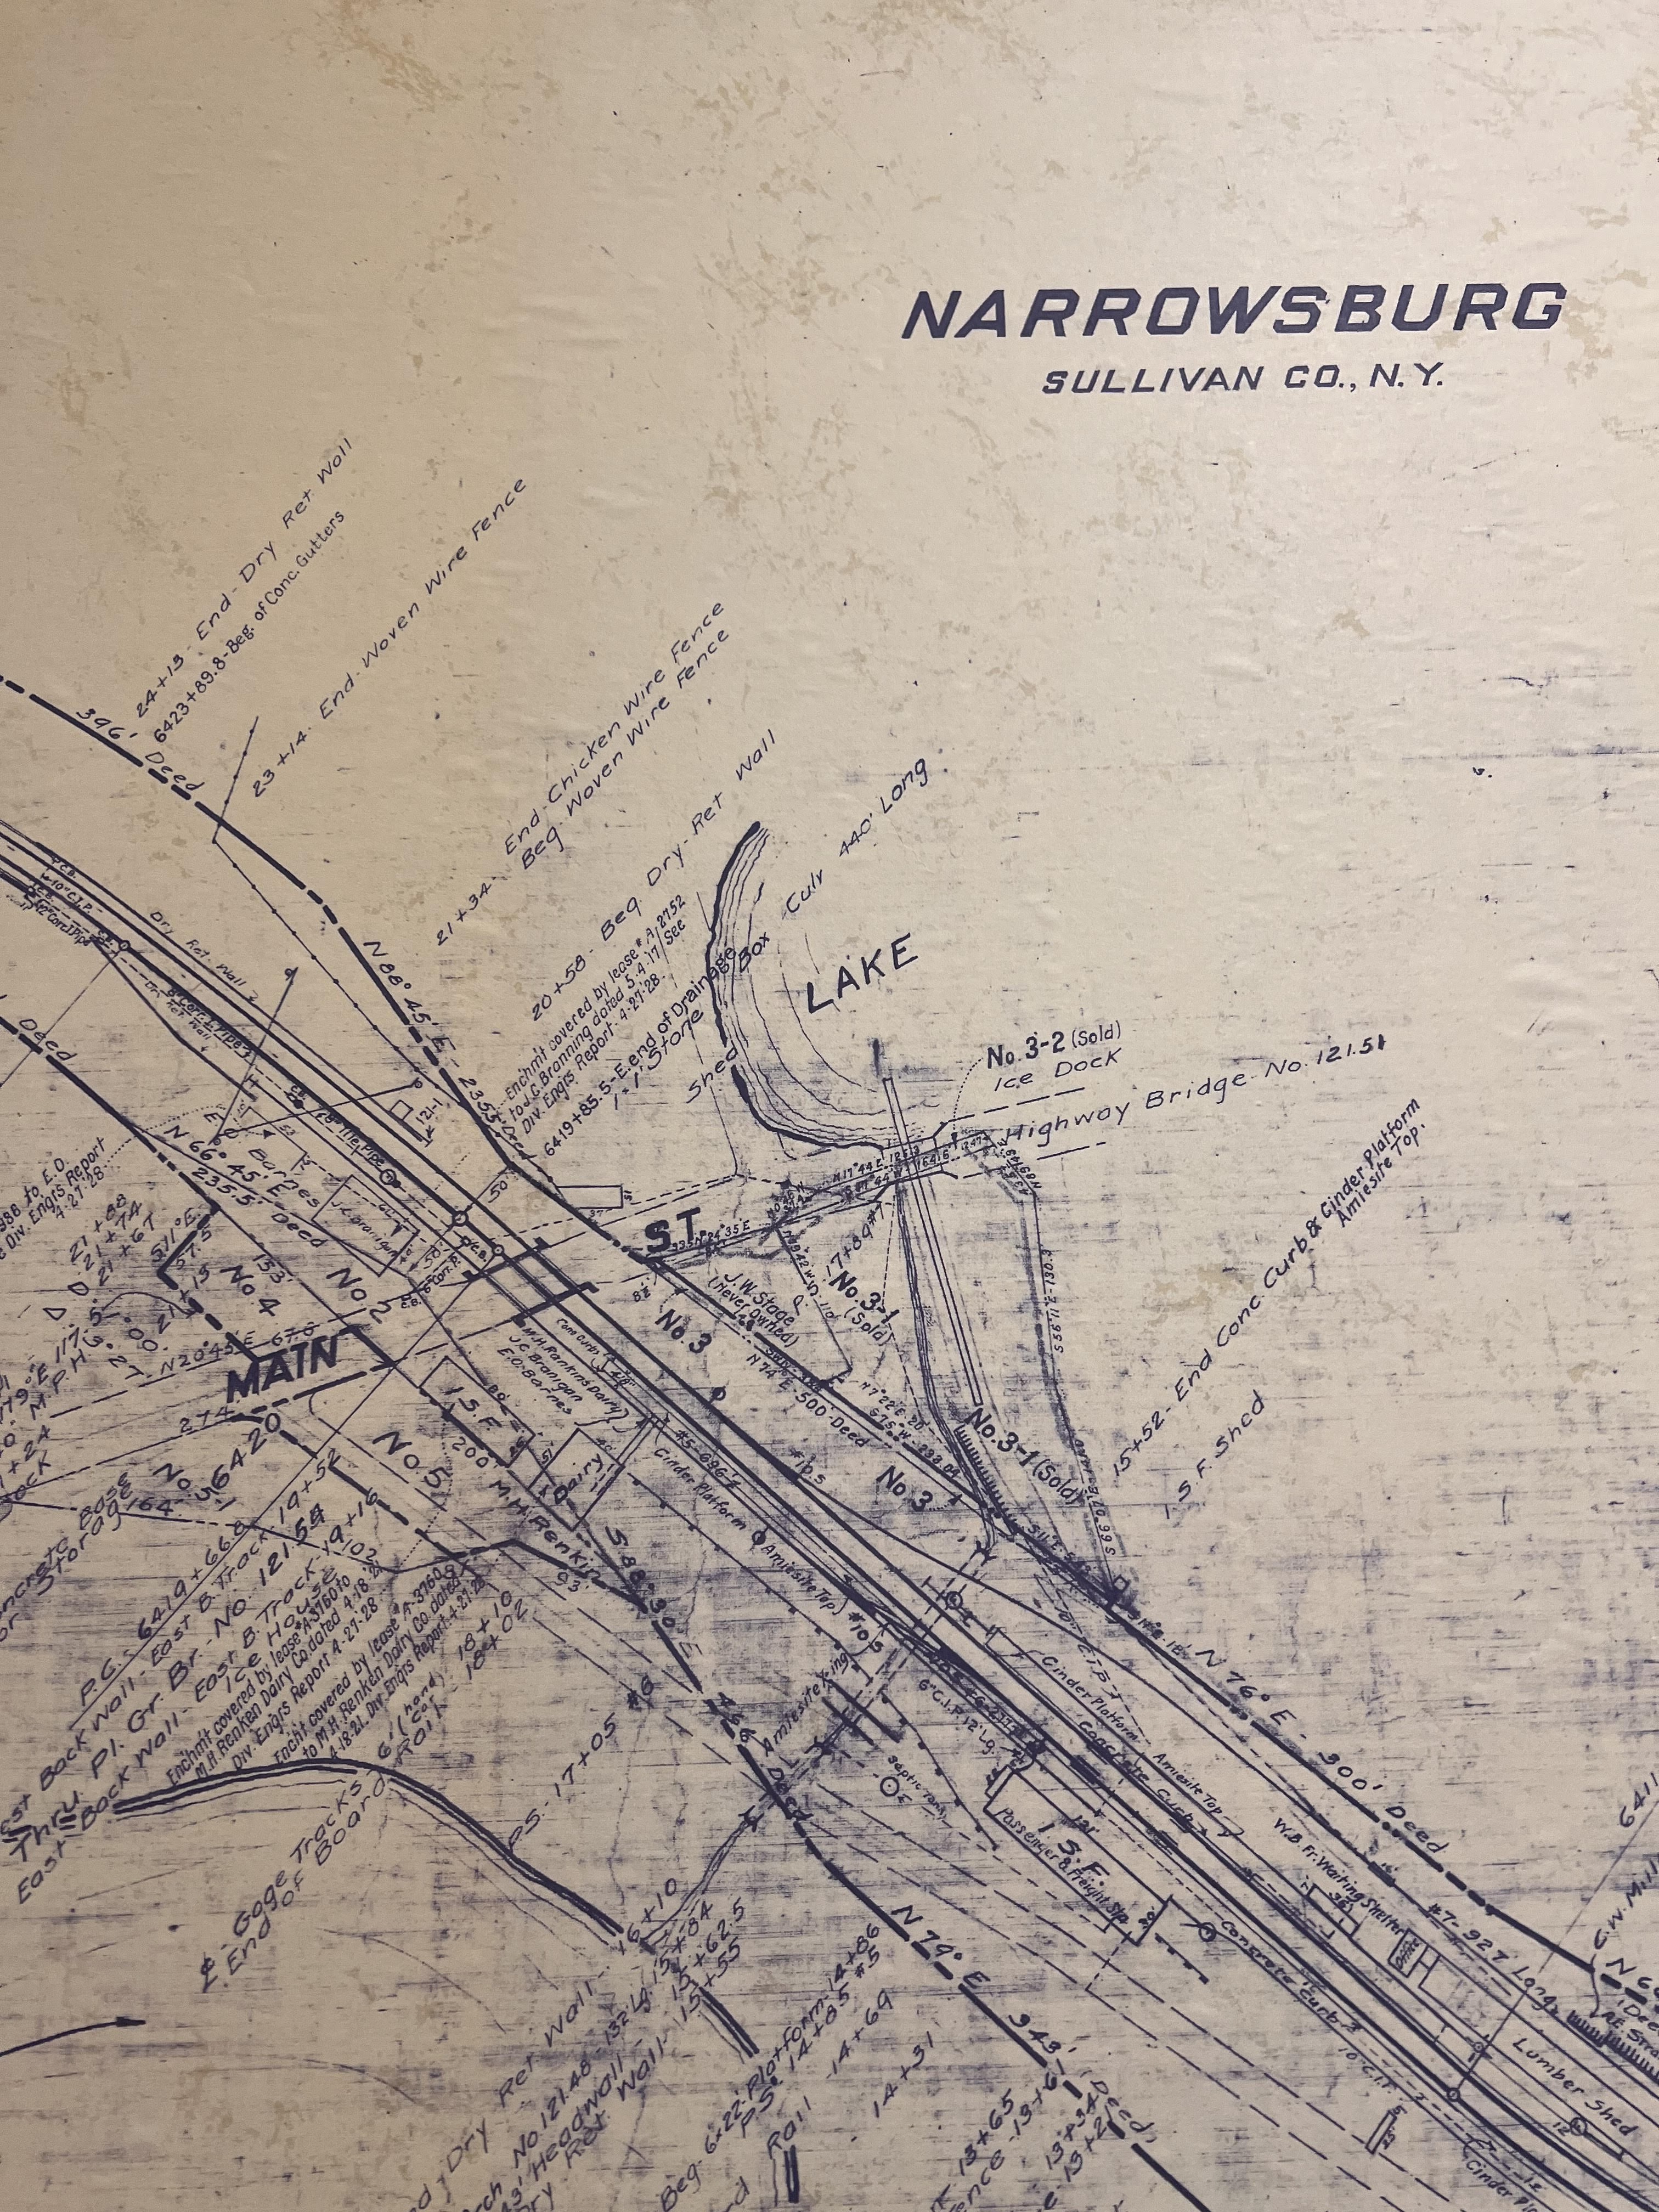 From a copy on wall of Narrowsburg Union